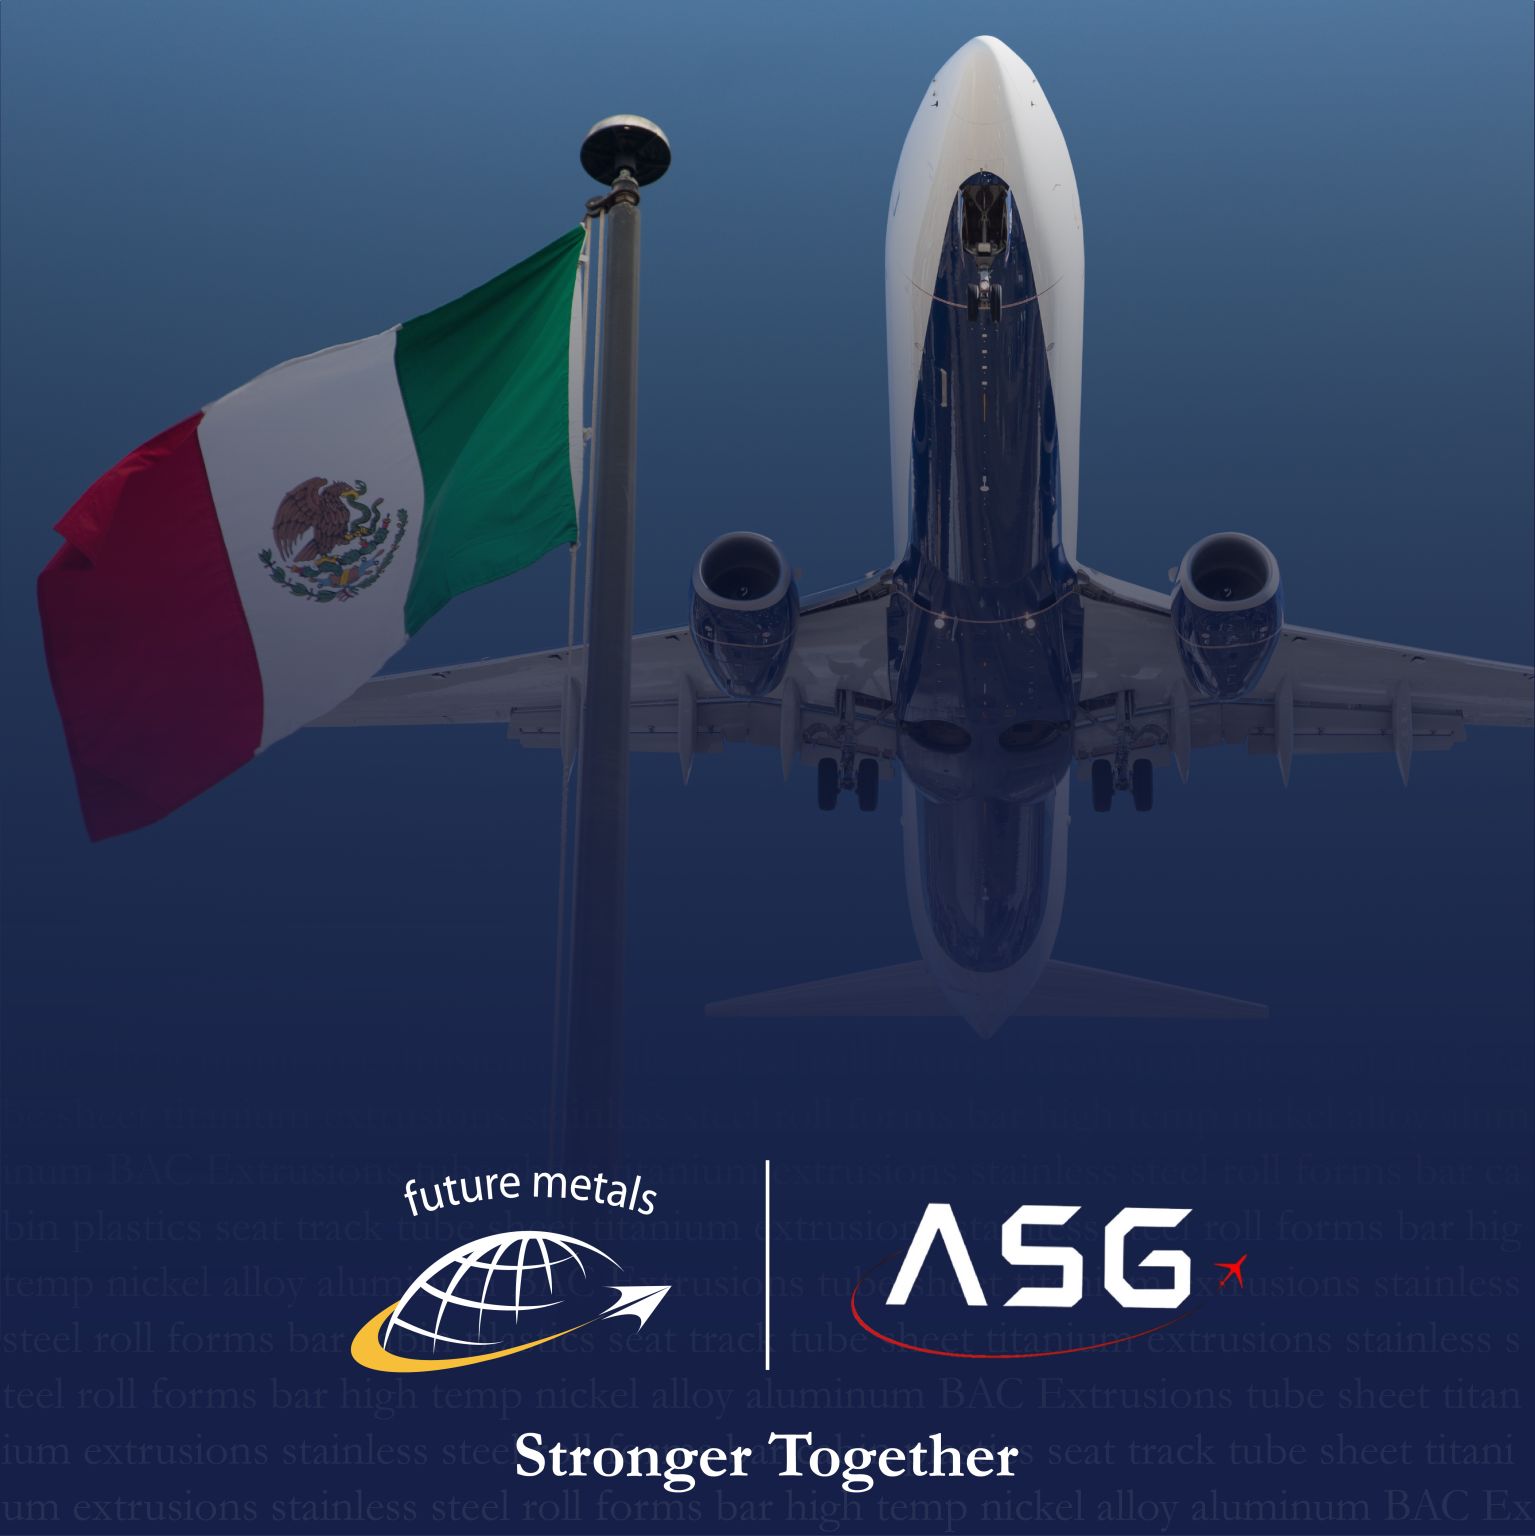 future metals Future Metals aircraft soars, framed by a Mexican flag, high-quality aerospace alloy featured prominently.